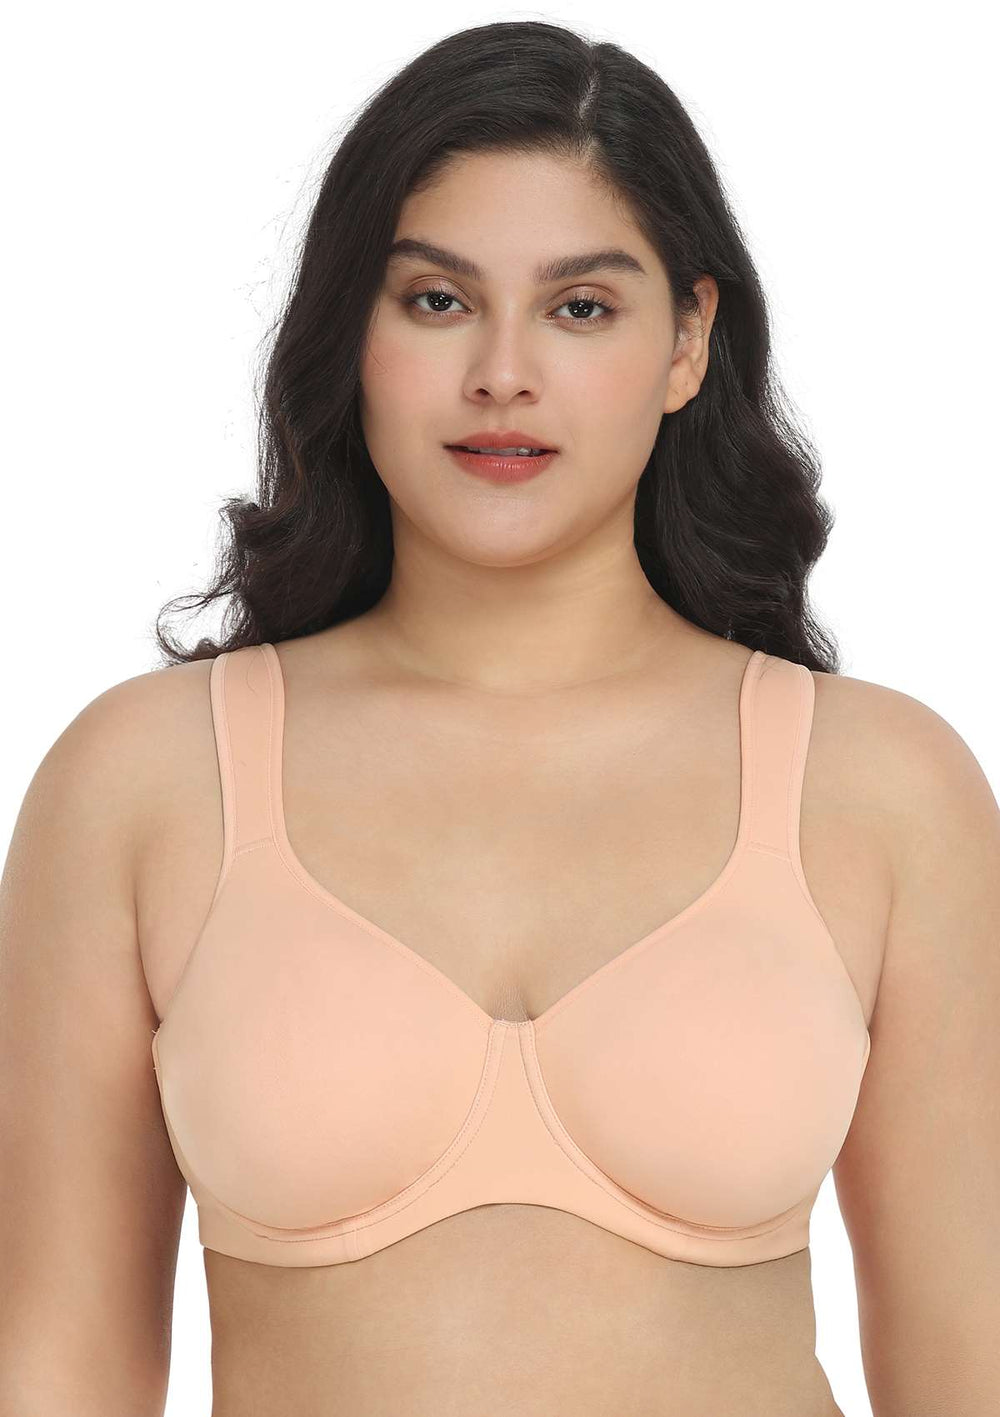 Underwired Full Cup Minimizer T-Shirt Bra in D-Cup Size